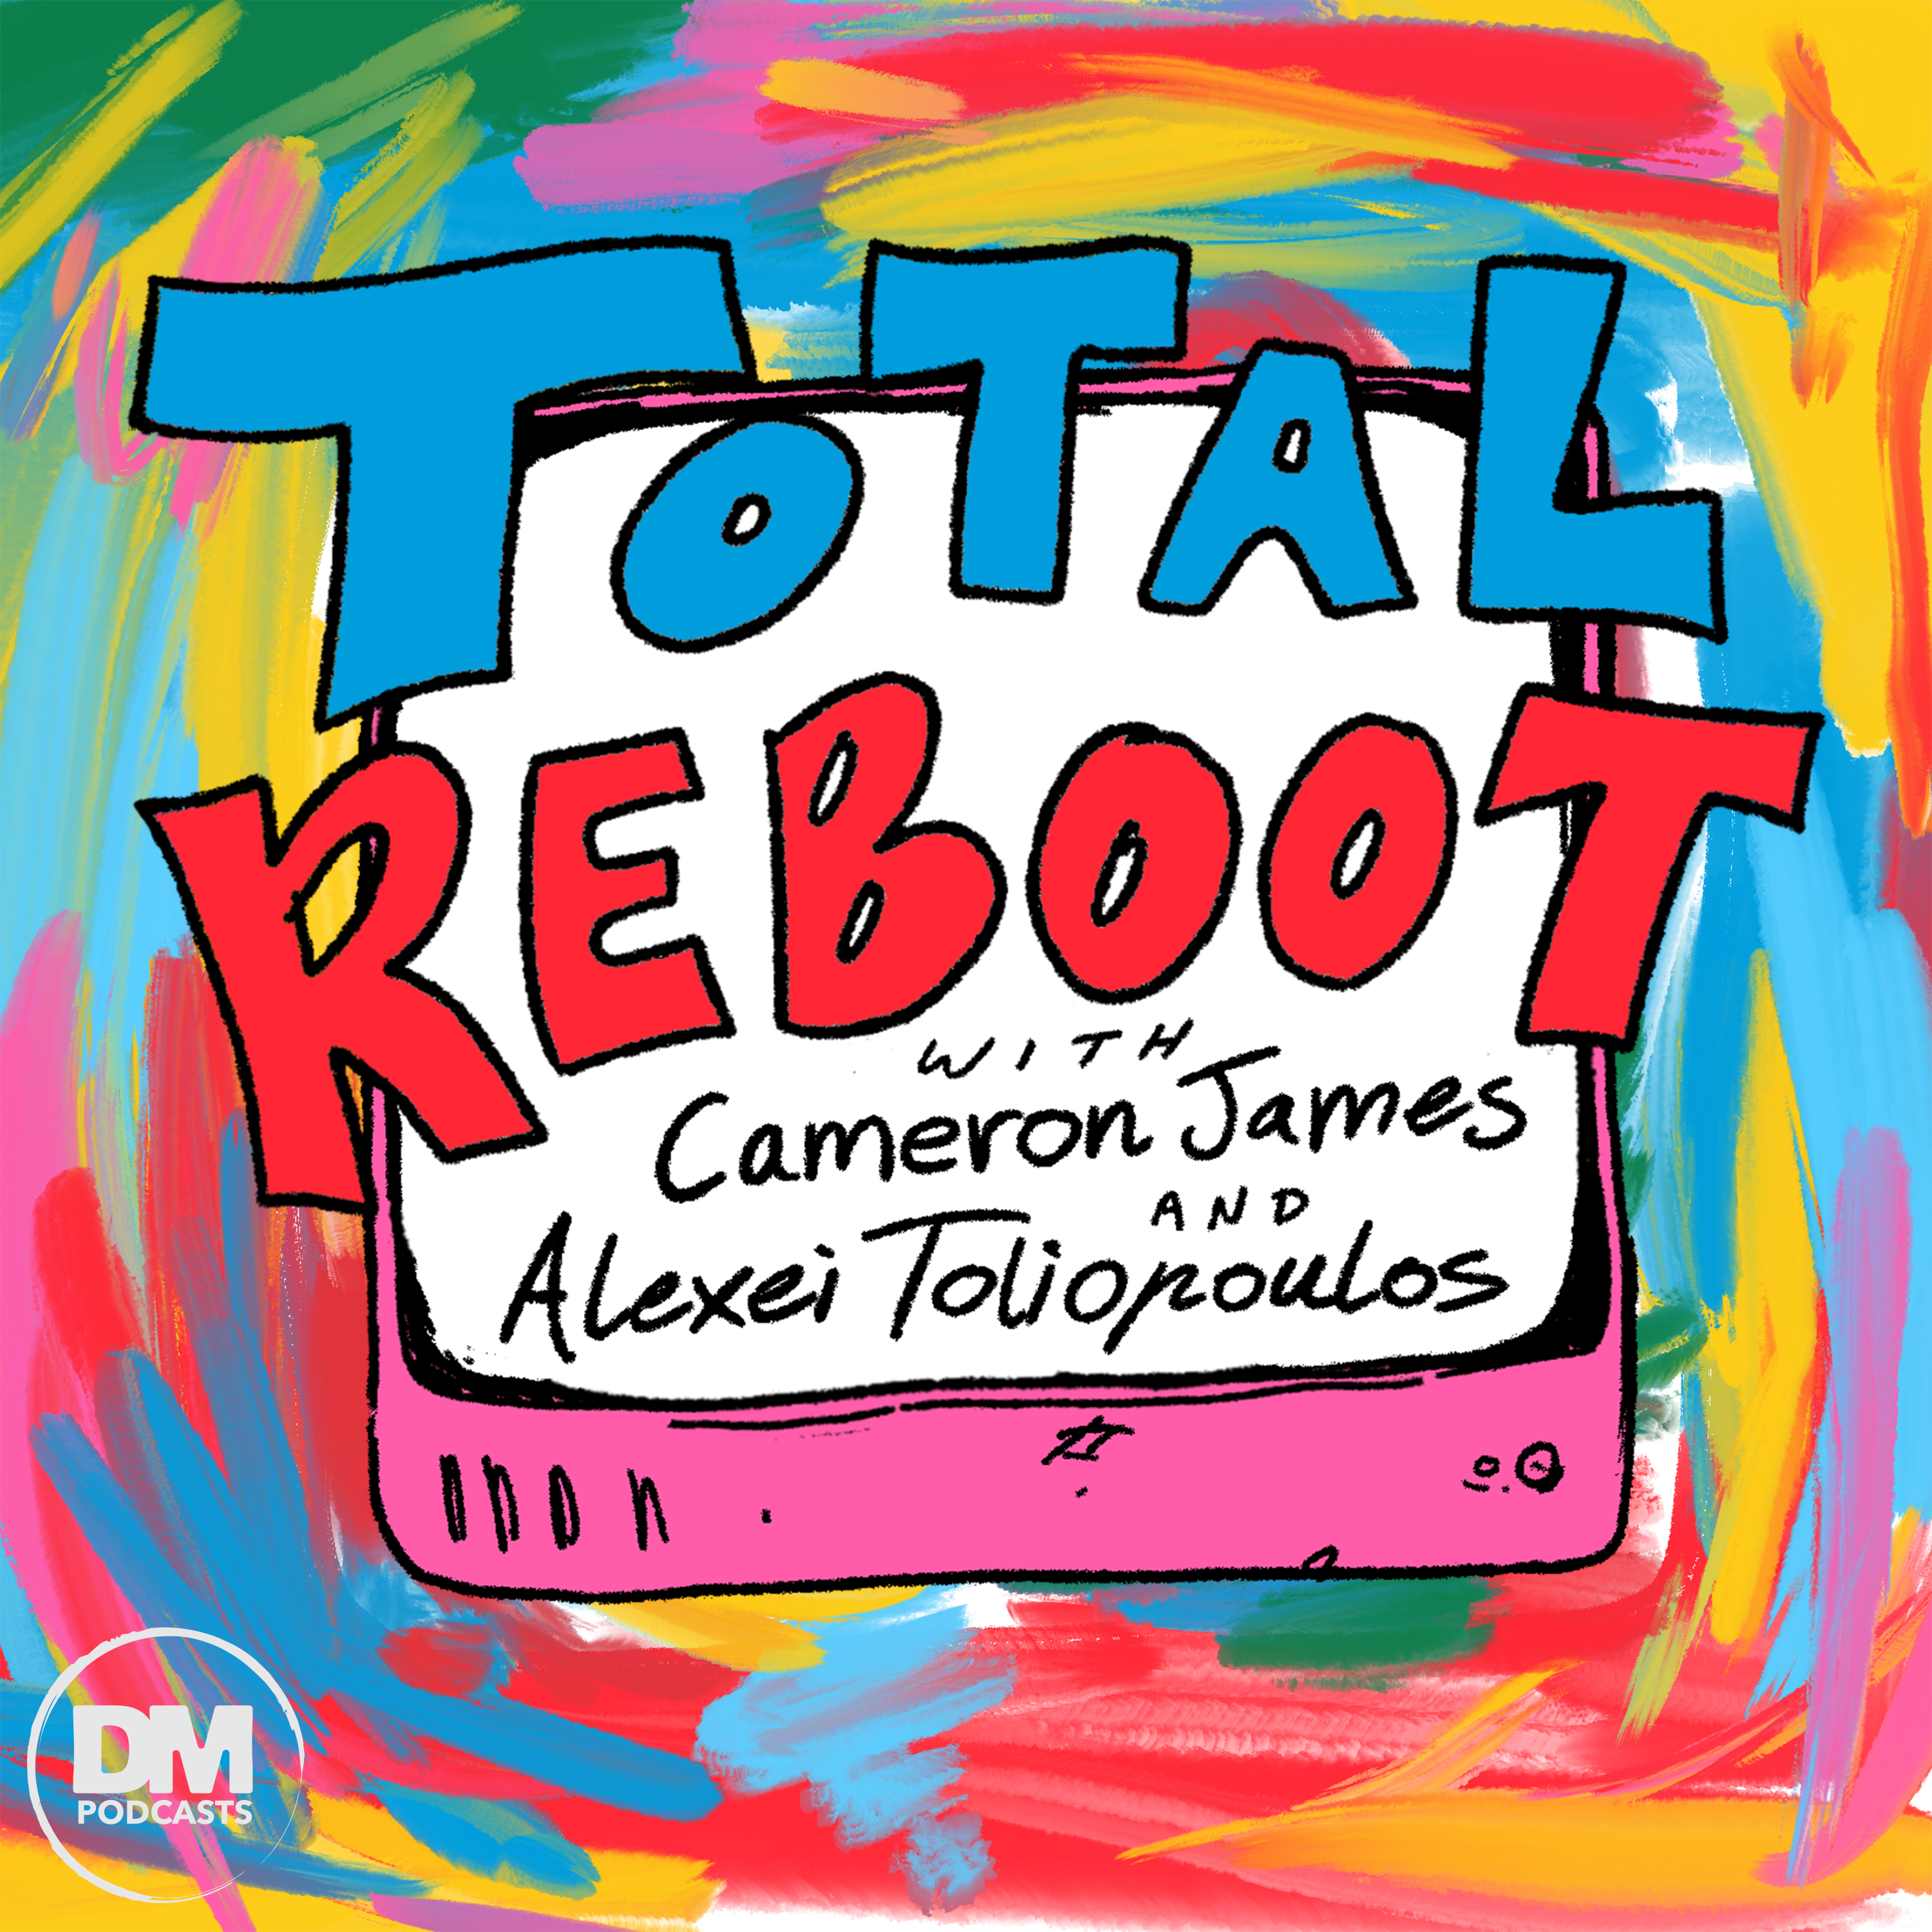 Total Reboot + Special Features Archive IS HERE